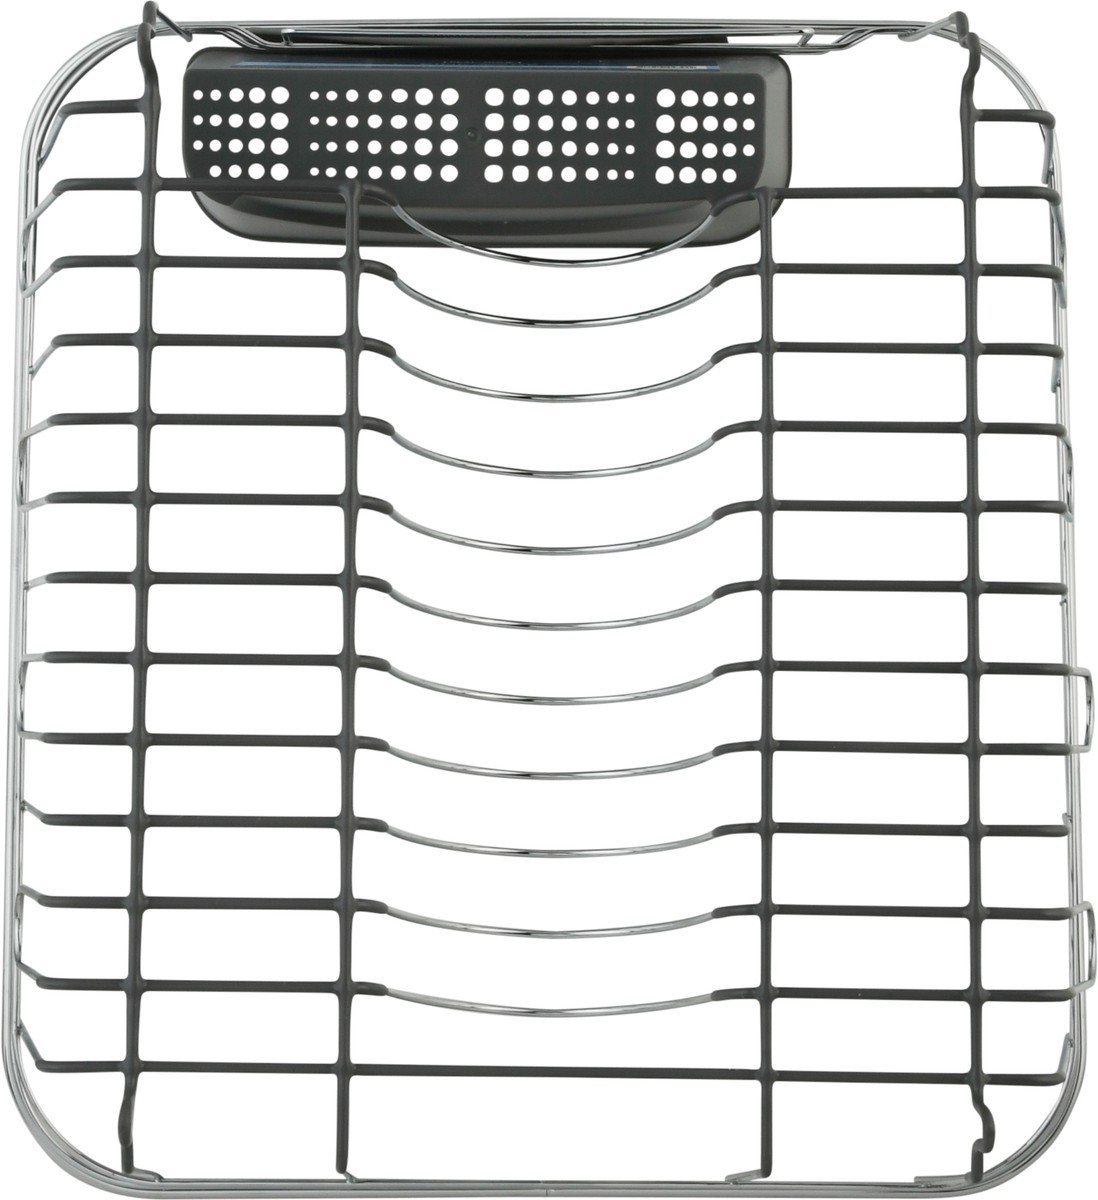 Real Home Innovations Small Dish Drainer, White 